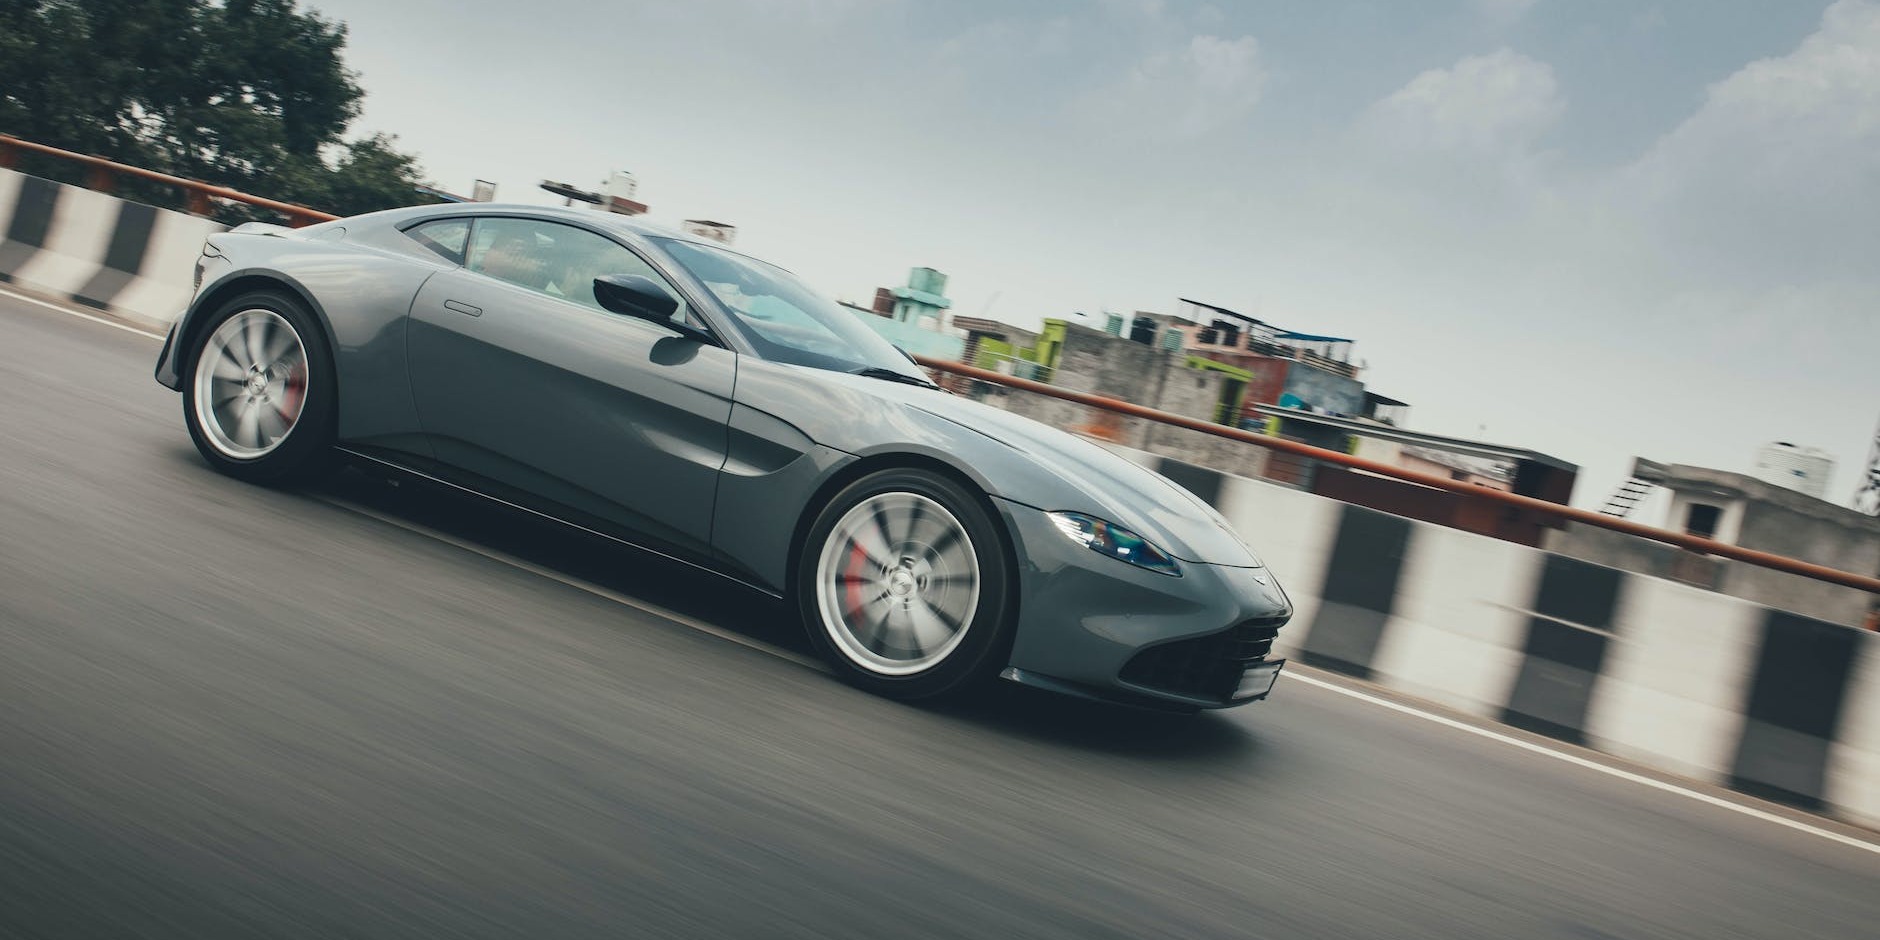 Discover the Aston Martin Experience in Manchester